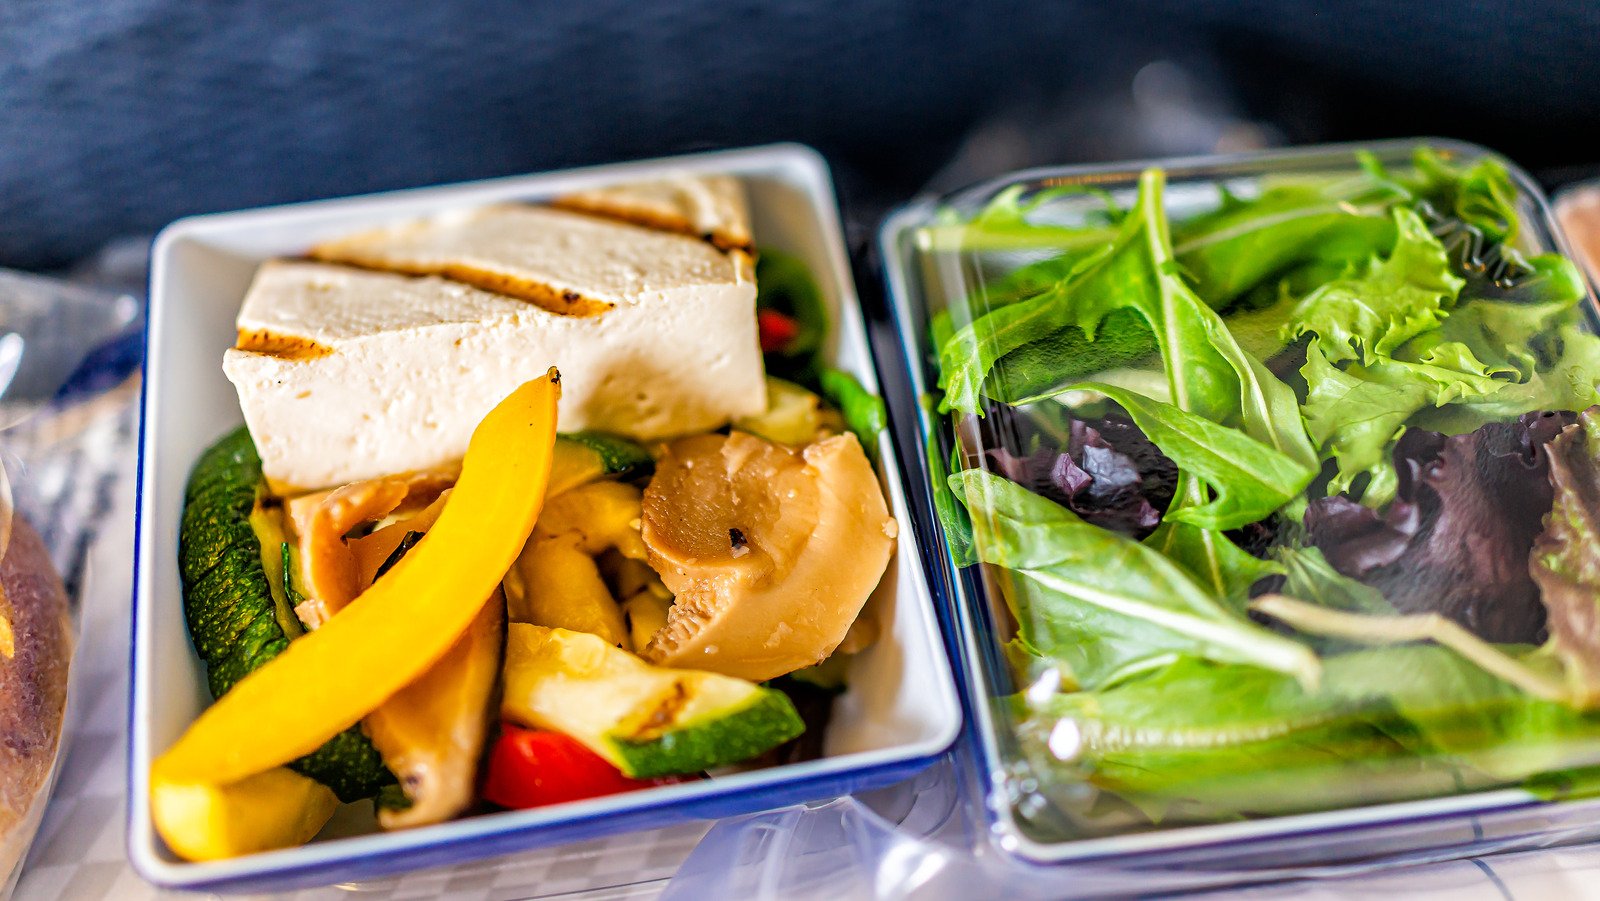 Which Airlines Have The Best Vegan In-Flight Options?